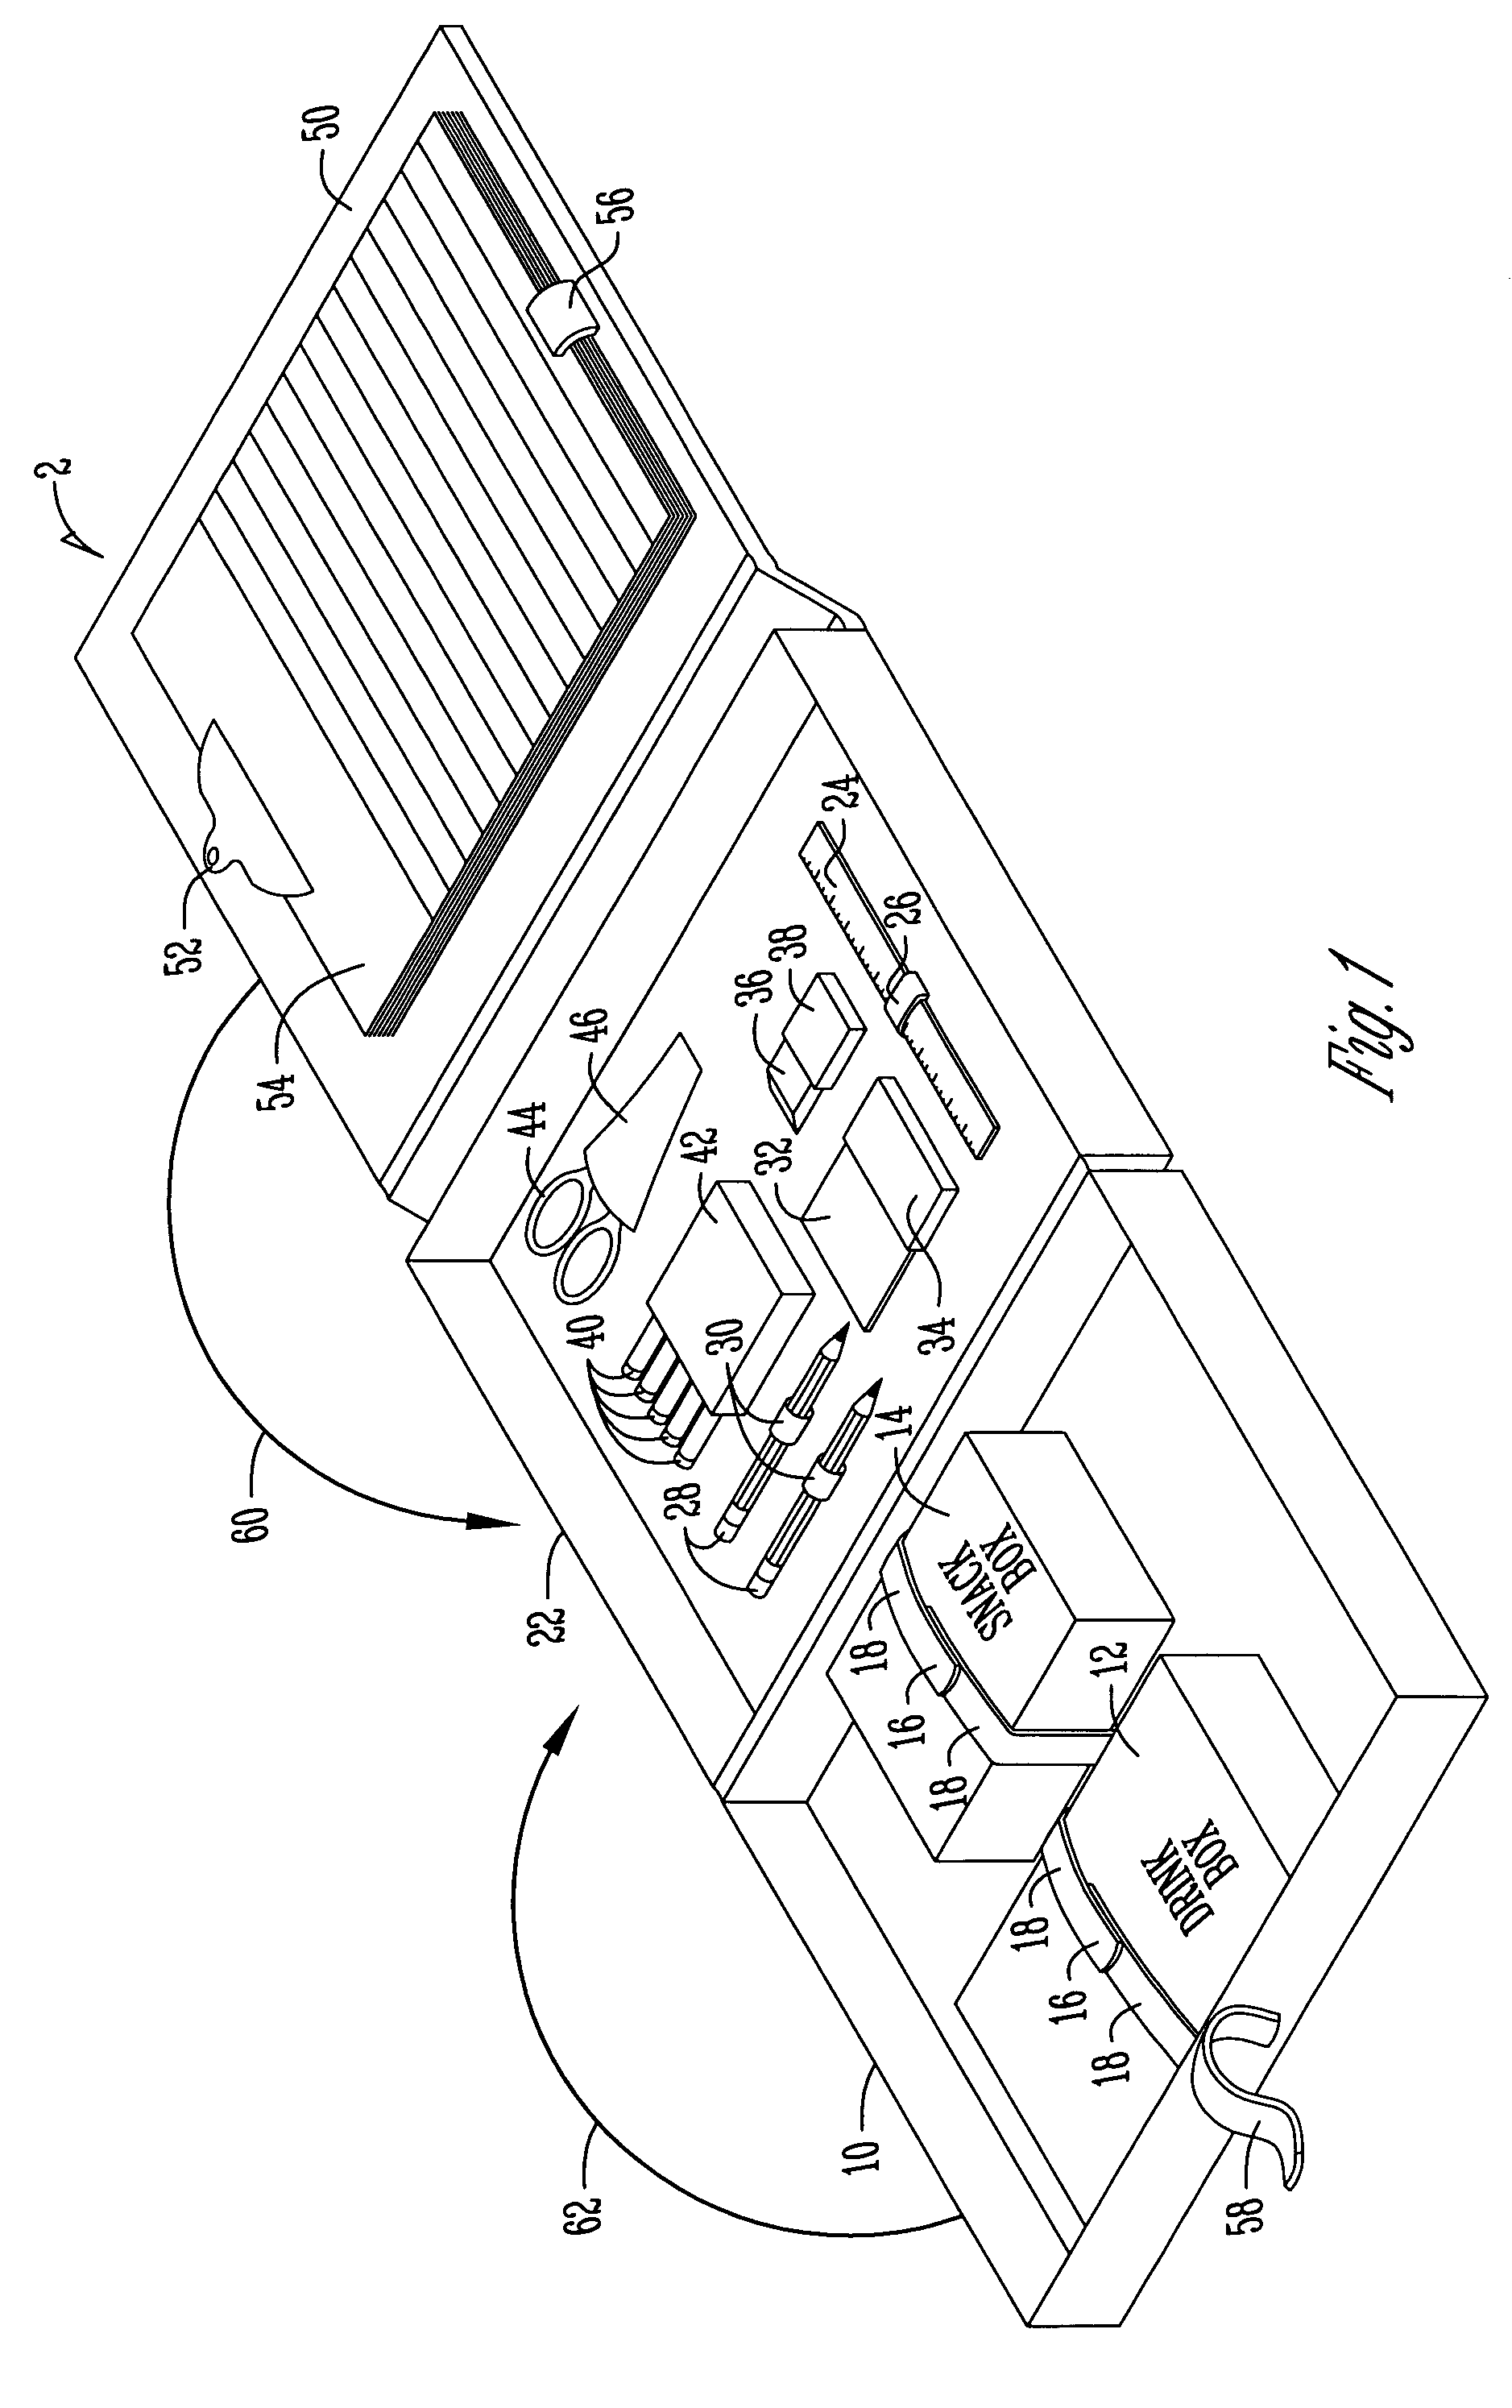 Apparatus and method for storing snack items and school supplies